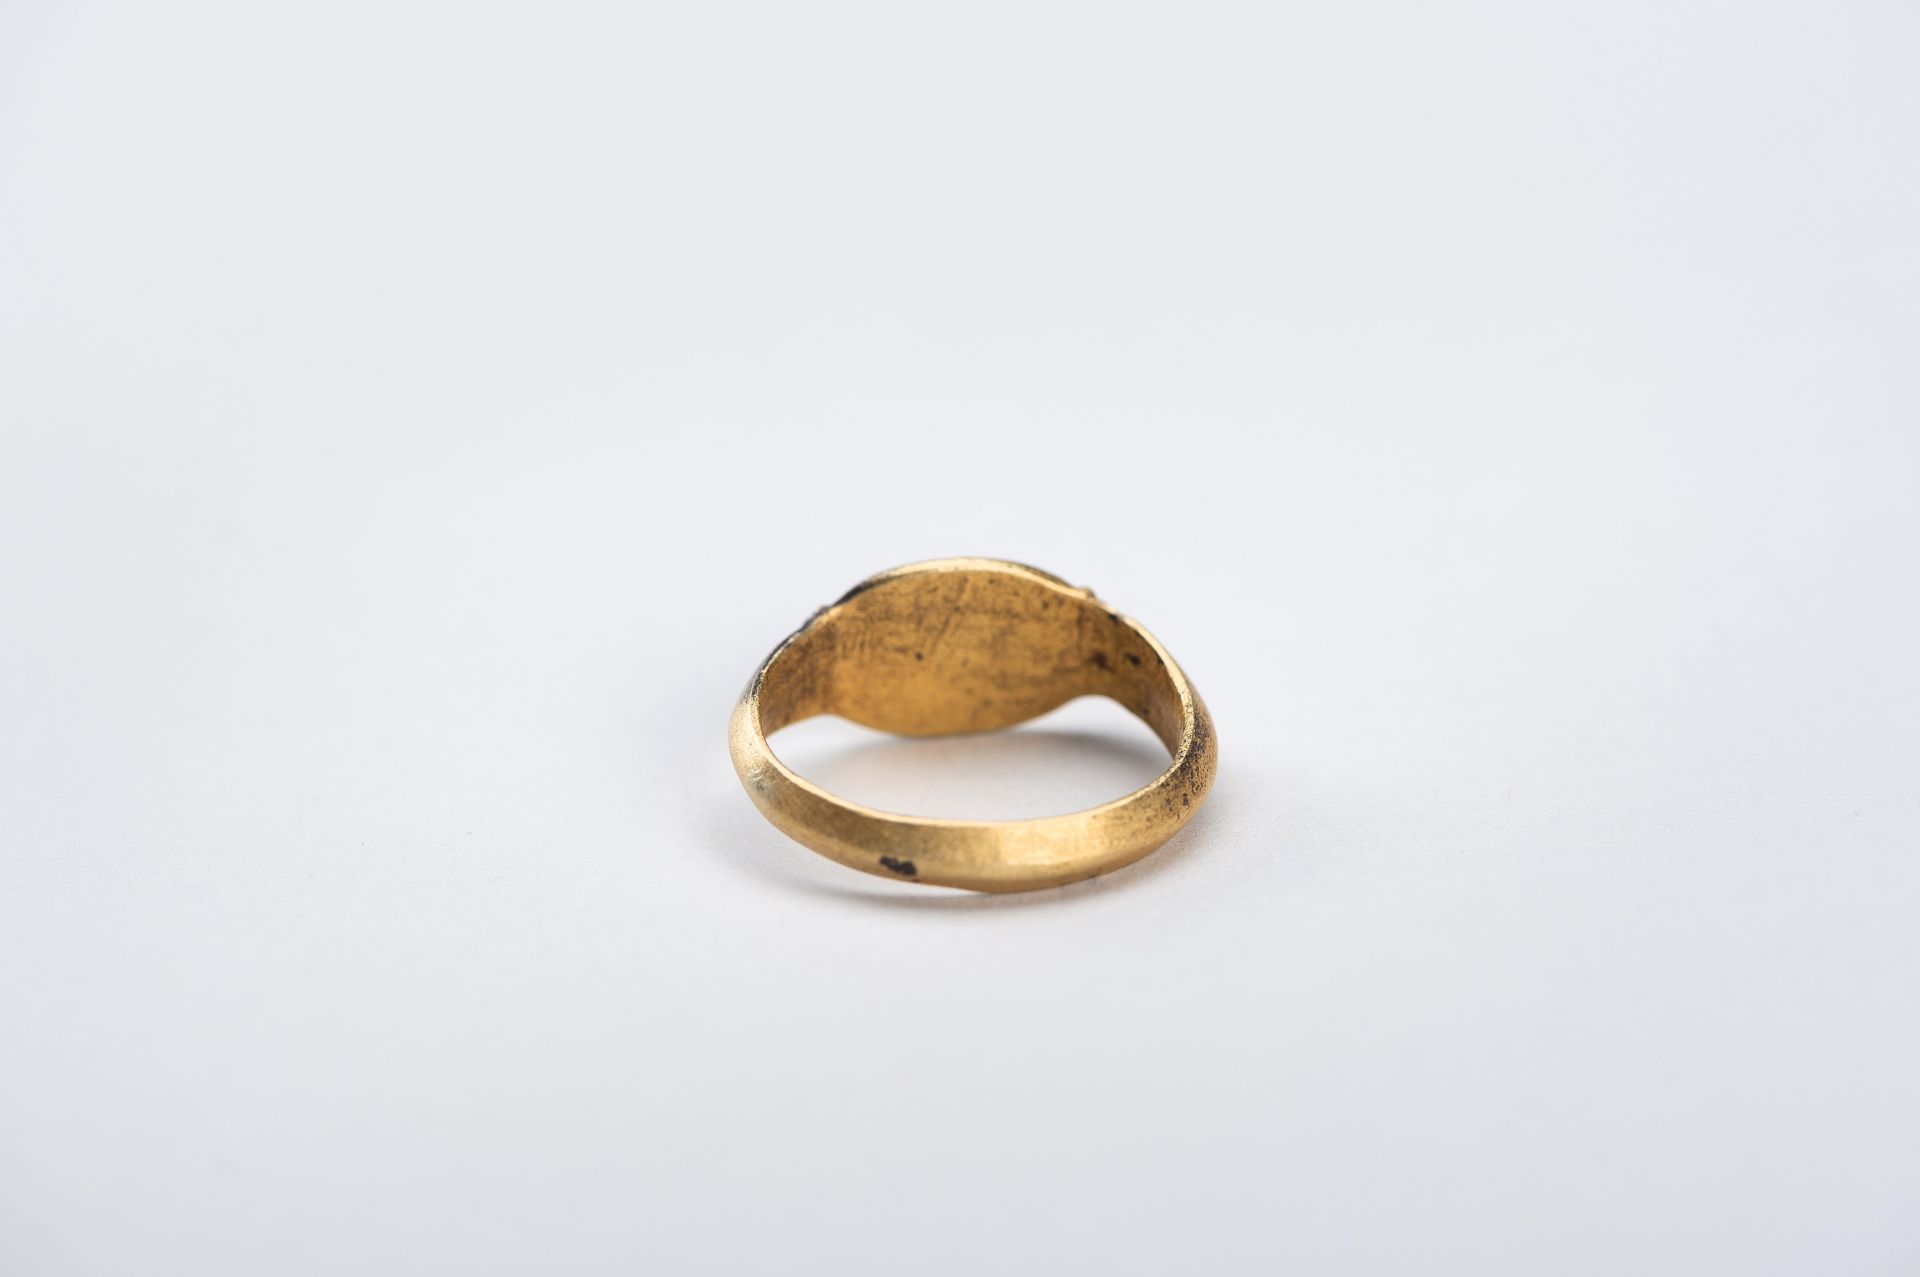 AN ANCIENT BACTRIAN GOLD SEAL RING - Image 8 of 10